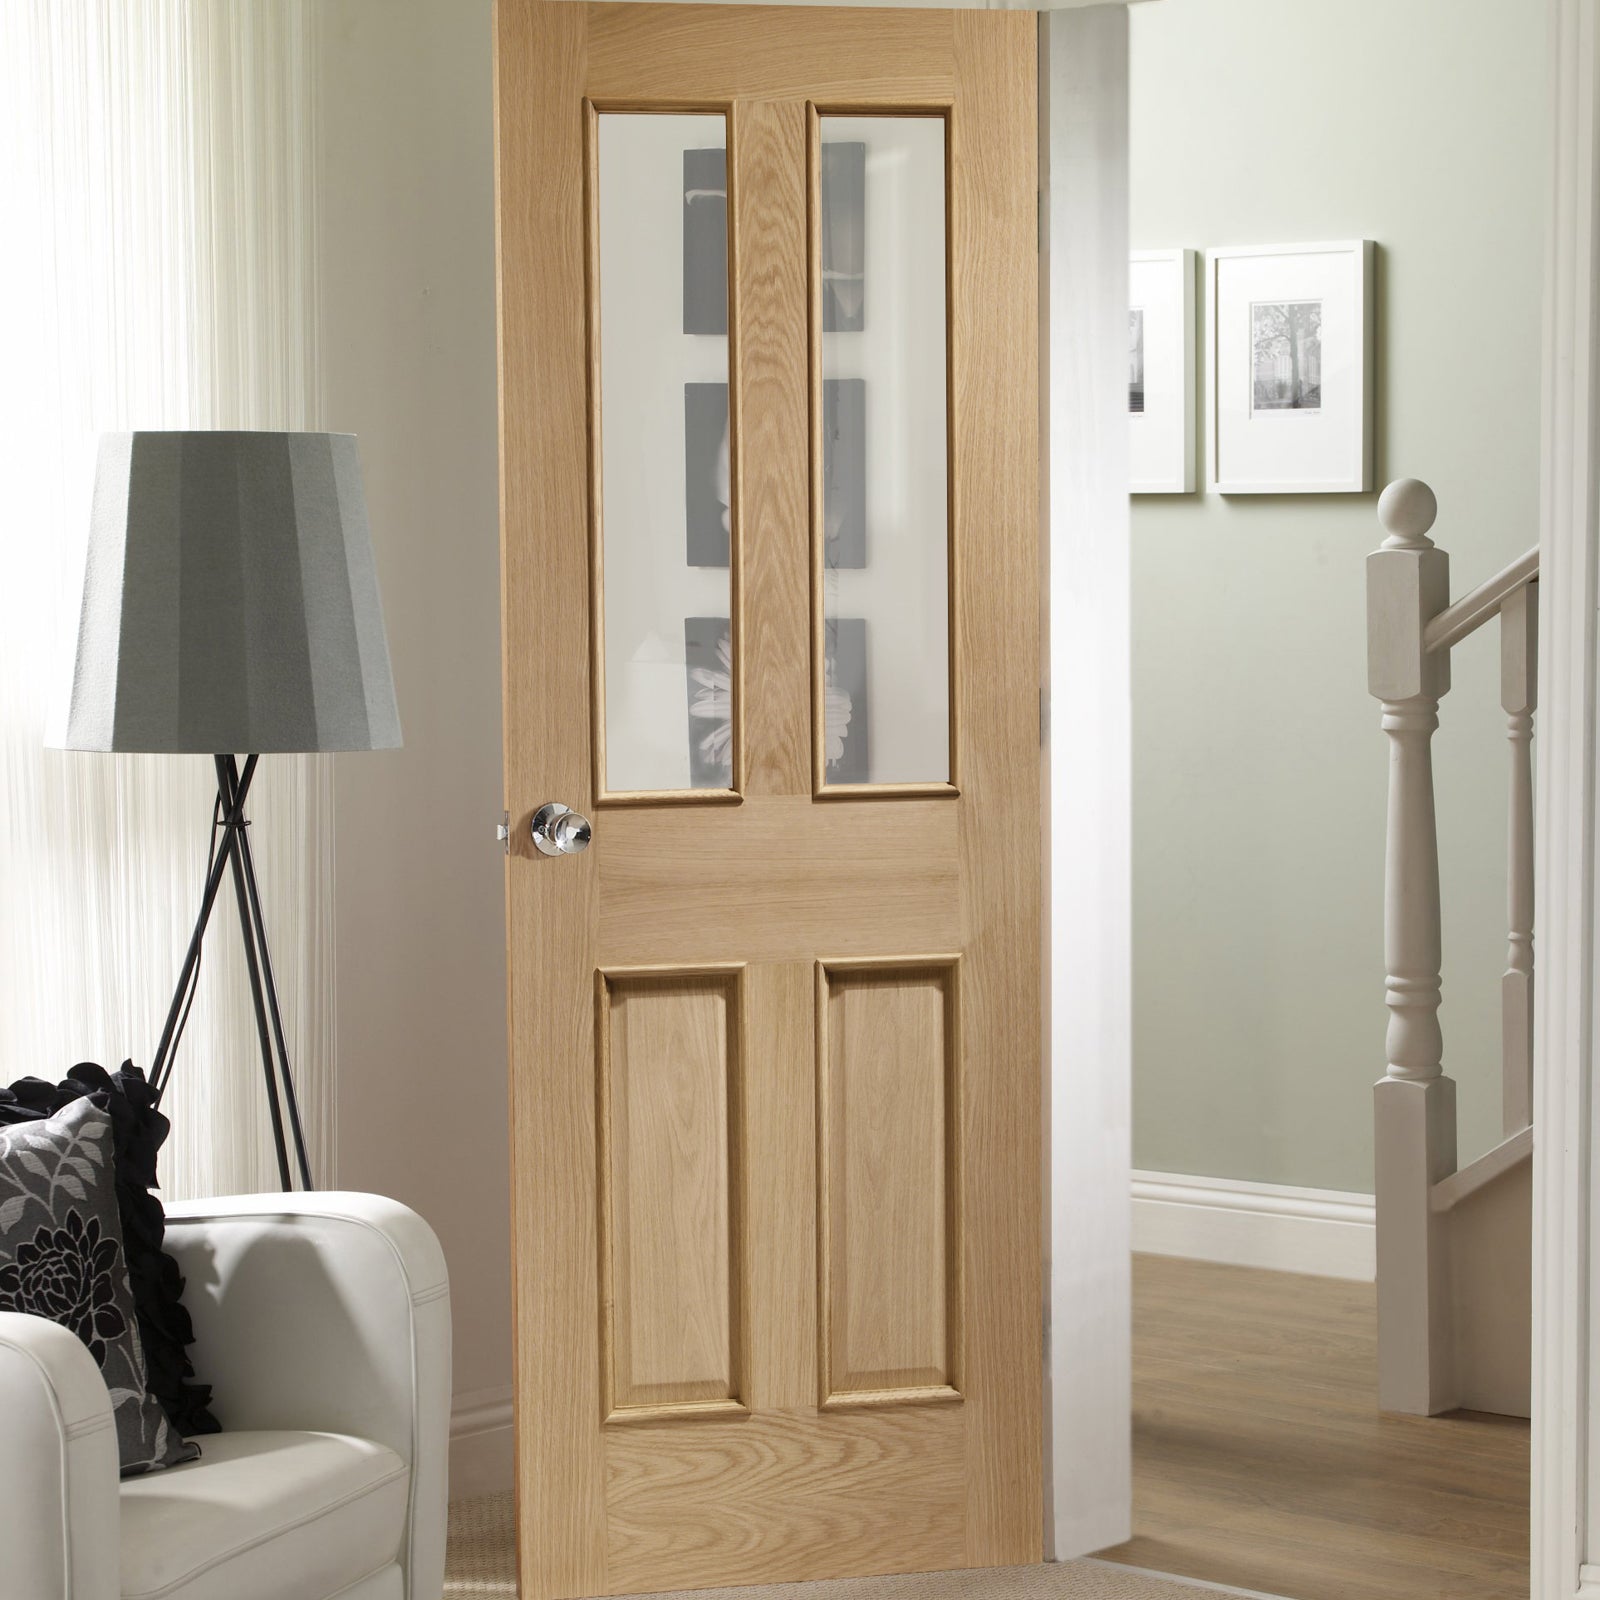 SHOW Internal Oak Malton Door with Clear Bevelled Glass and Raised Mouldings lifestyle